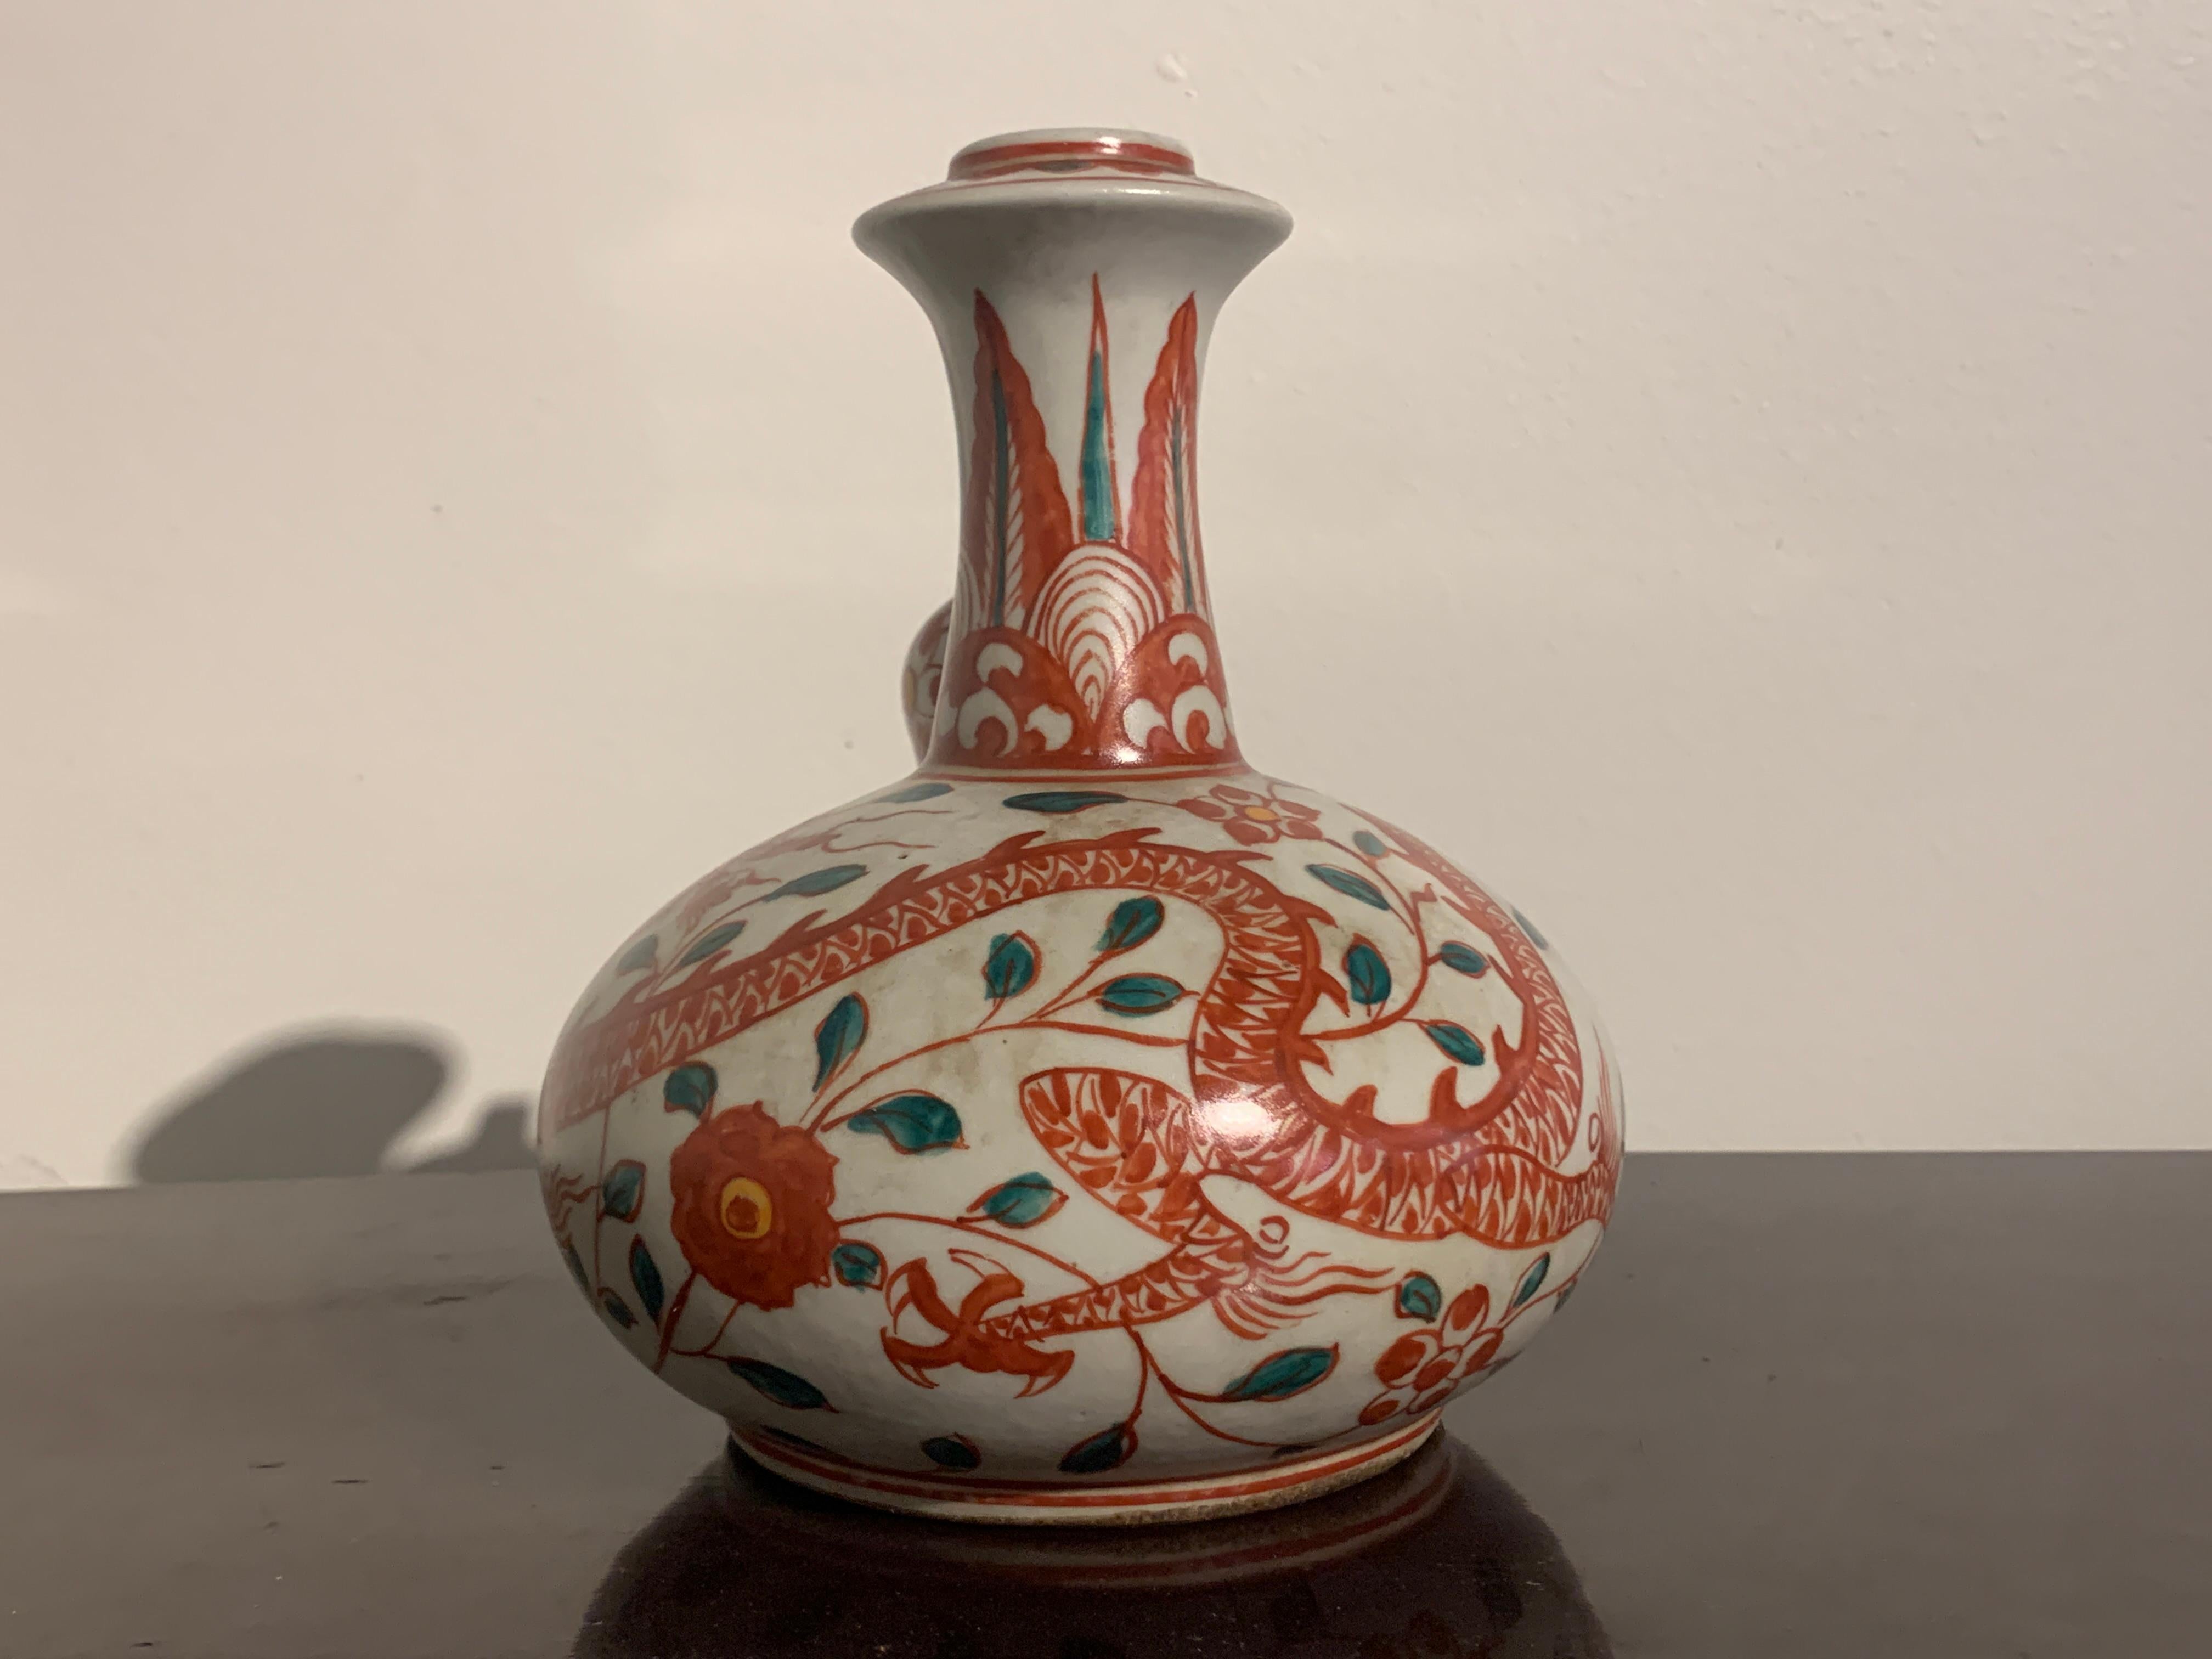 Glazed Chinese Export Kendi, Swatow Ware, Porcelain with Polychrome Enamels, circa 1900 For Sale